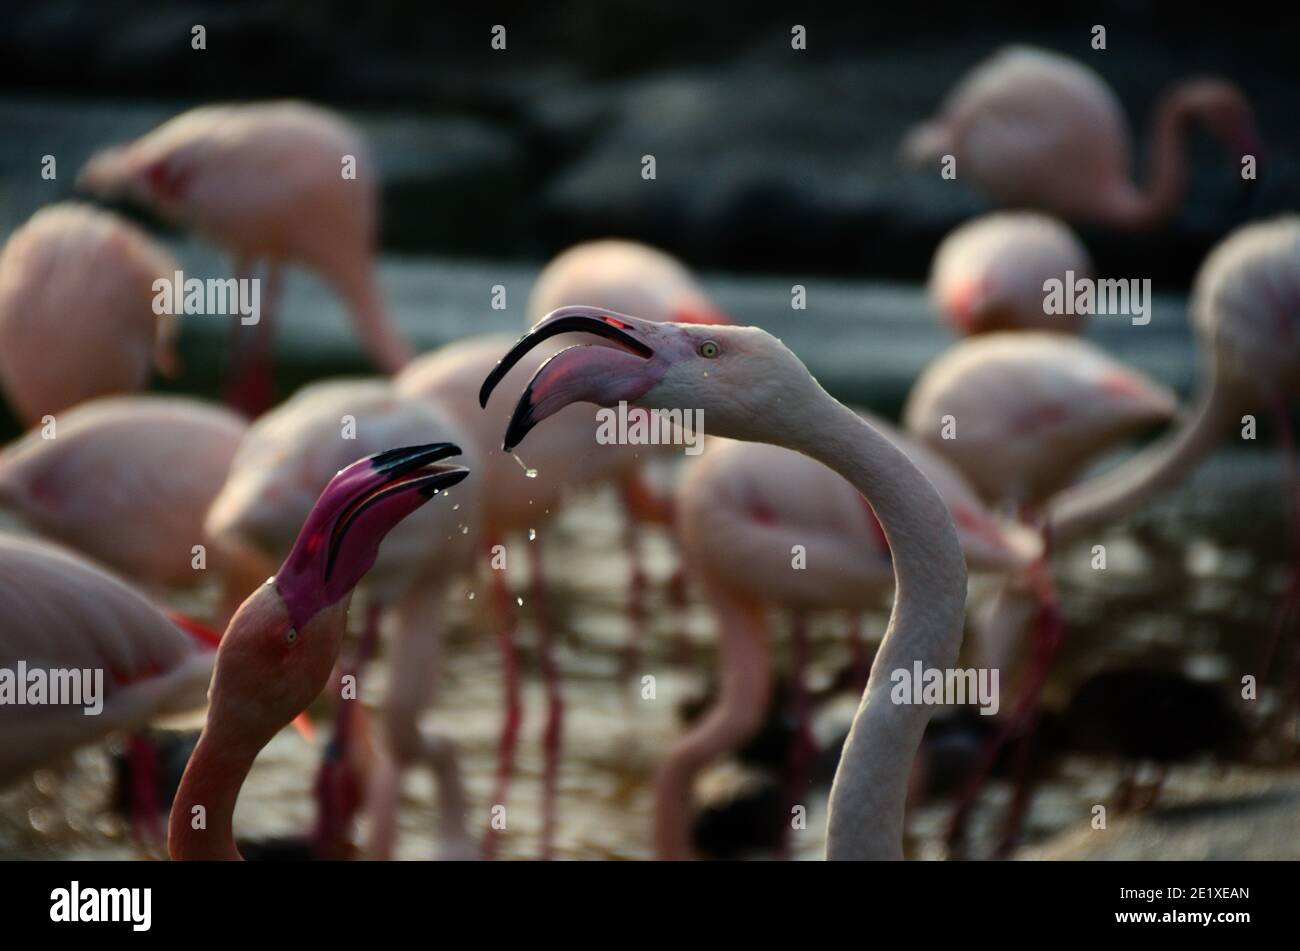 two colorful flamingos in disputes with drops of water Stock Photo